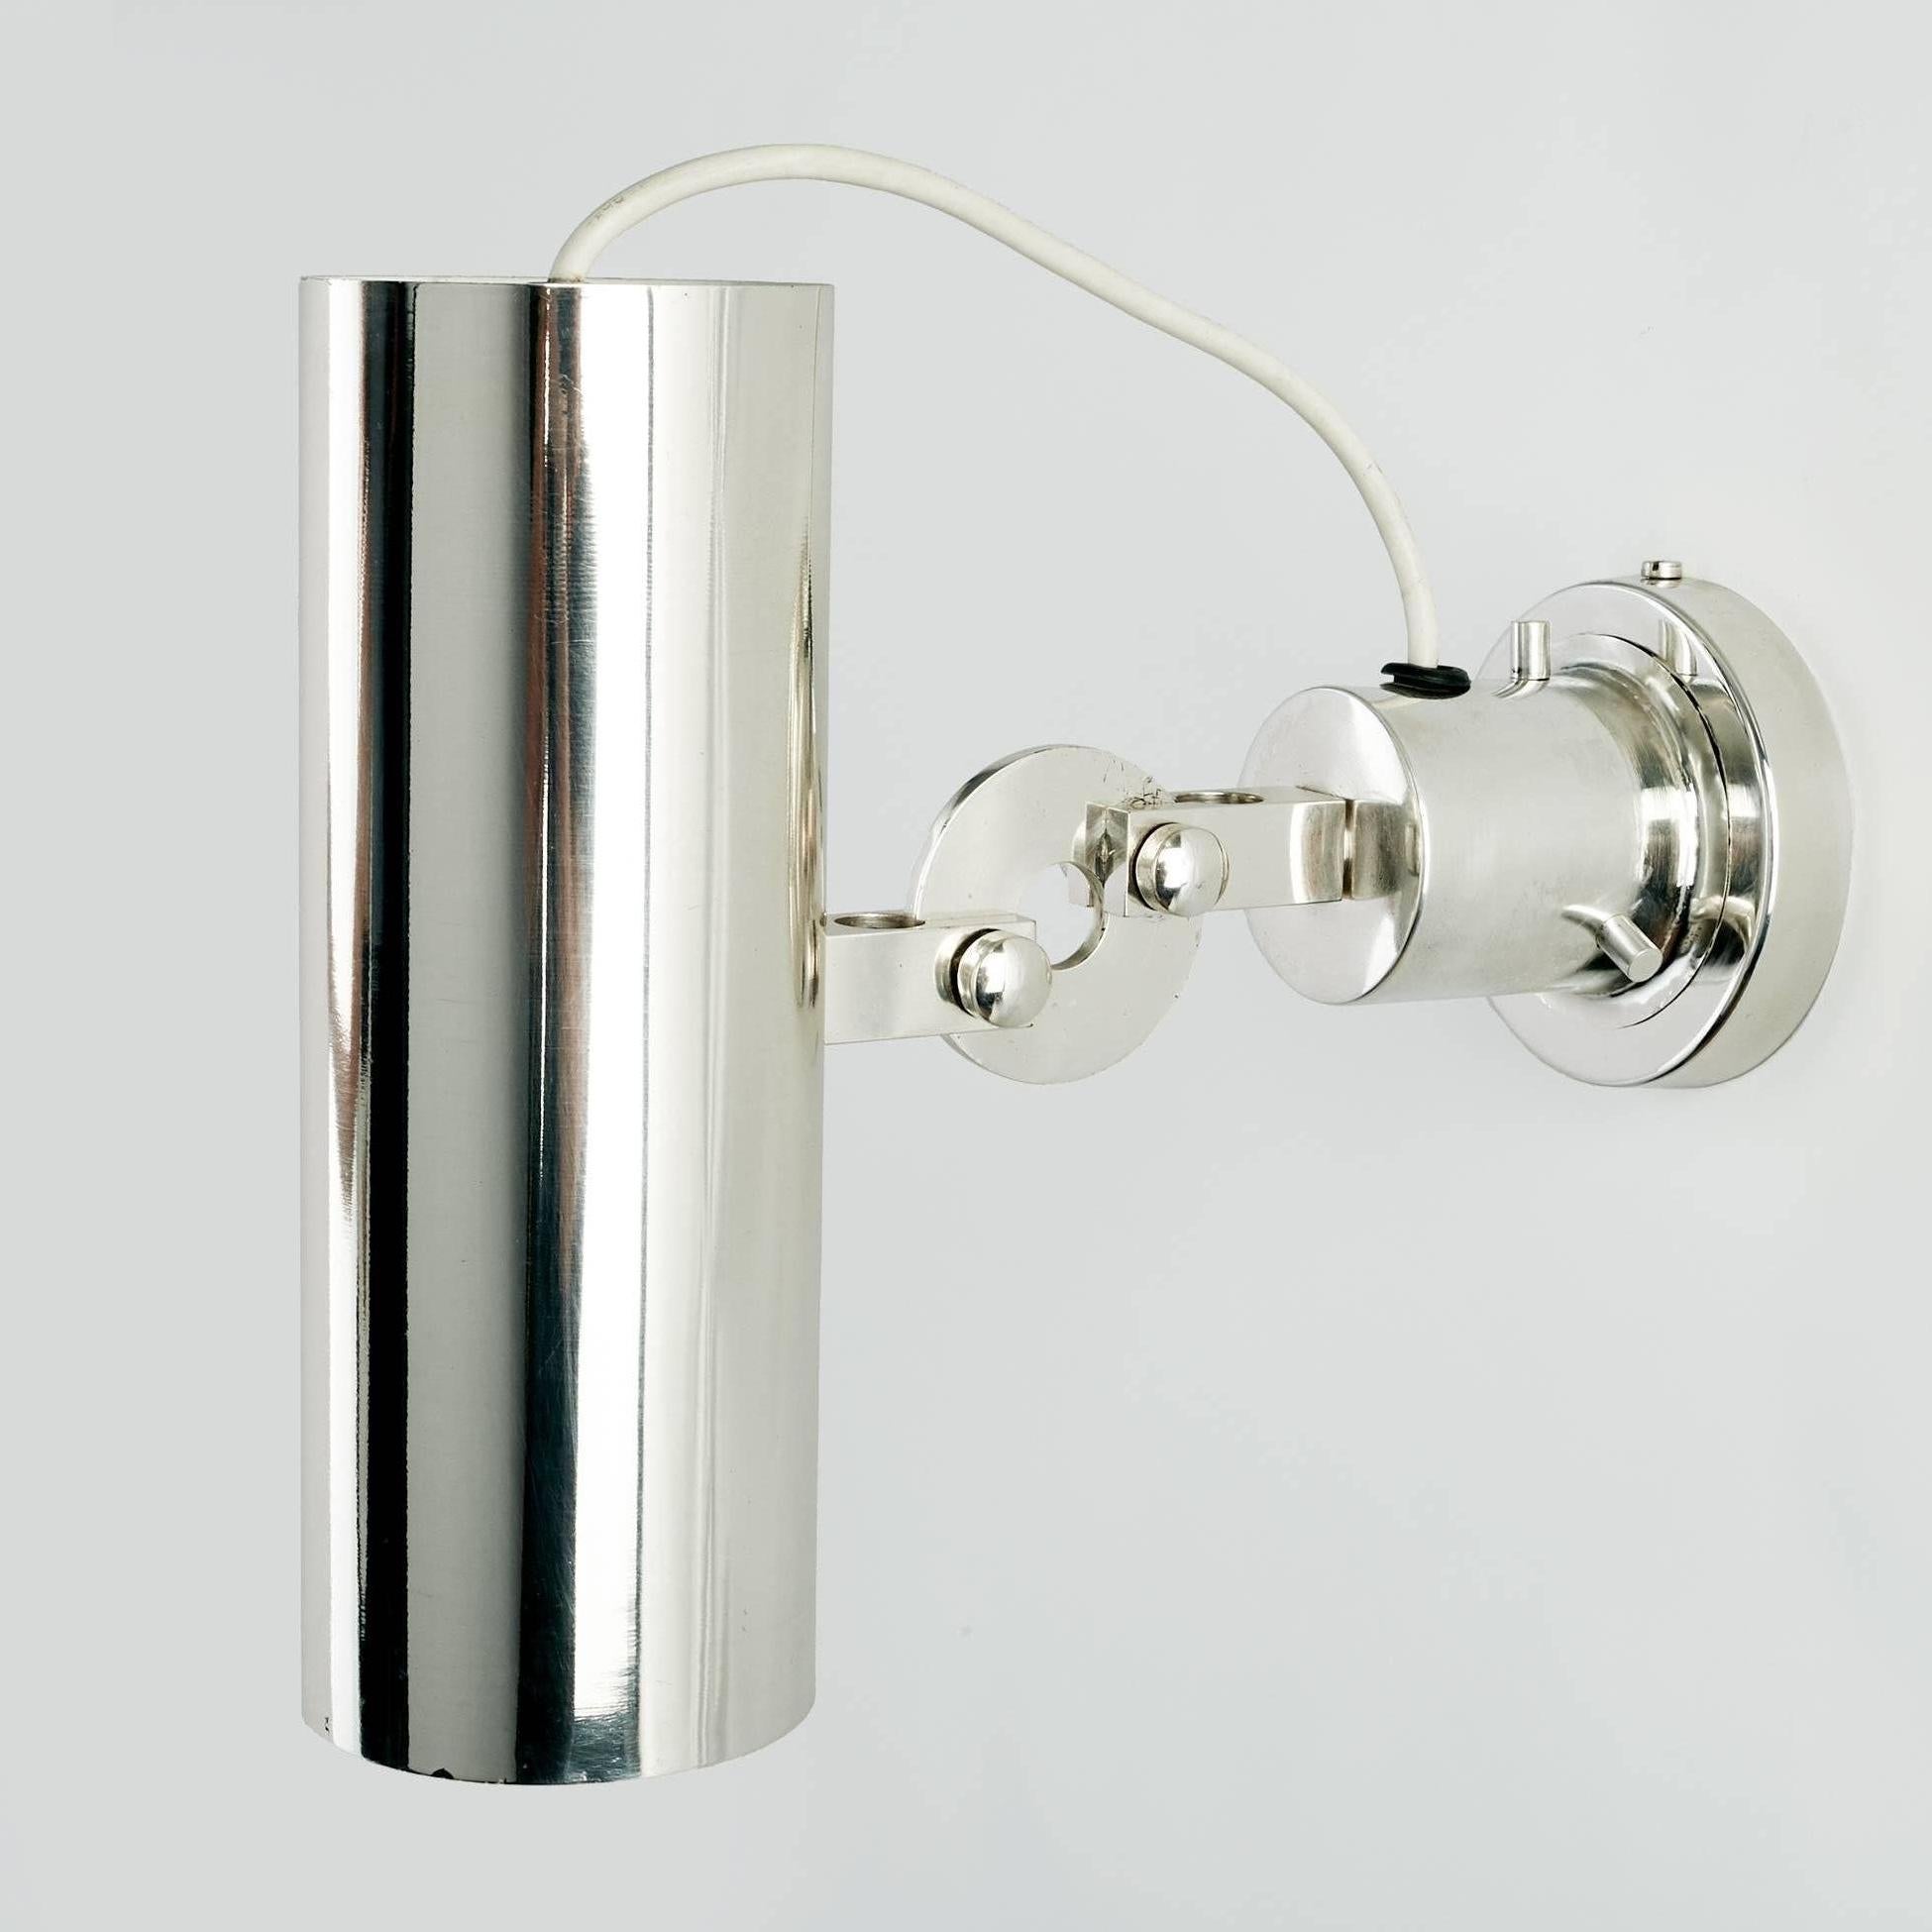 Silvered Modernist Chromed Cylinder Sconces with Industrial Art Deco Flair, France 1960's